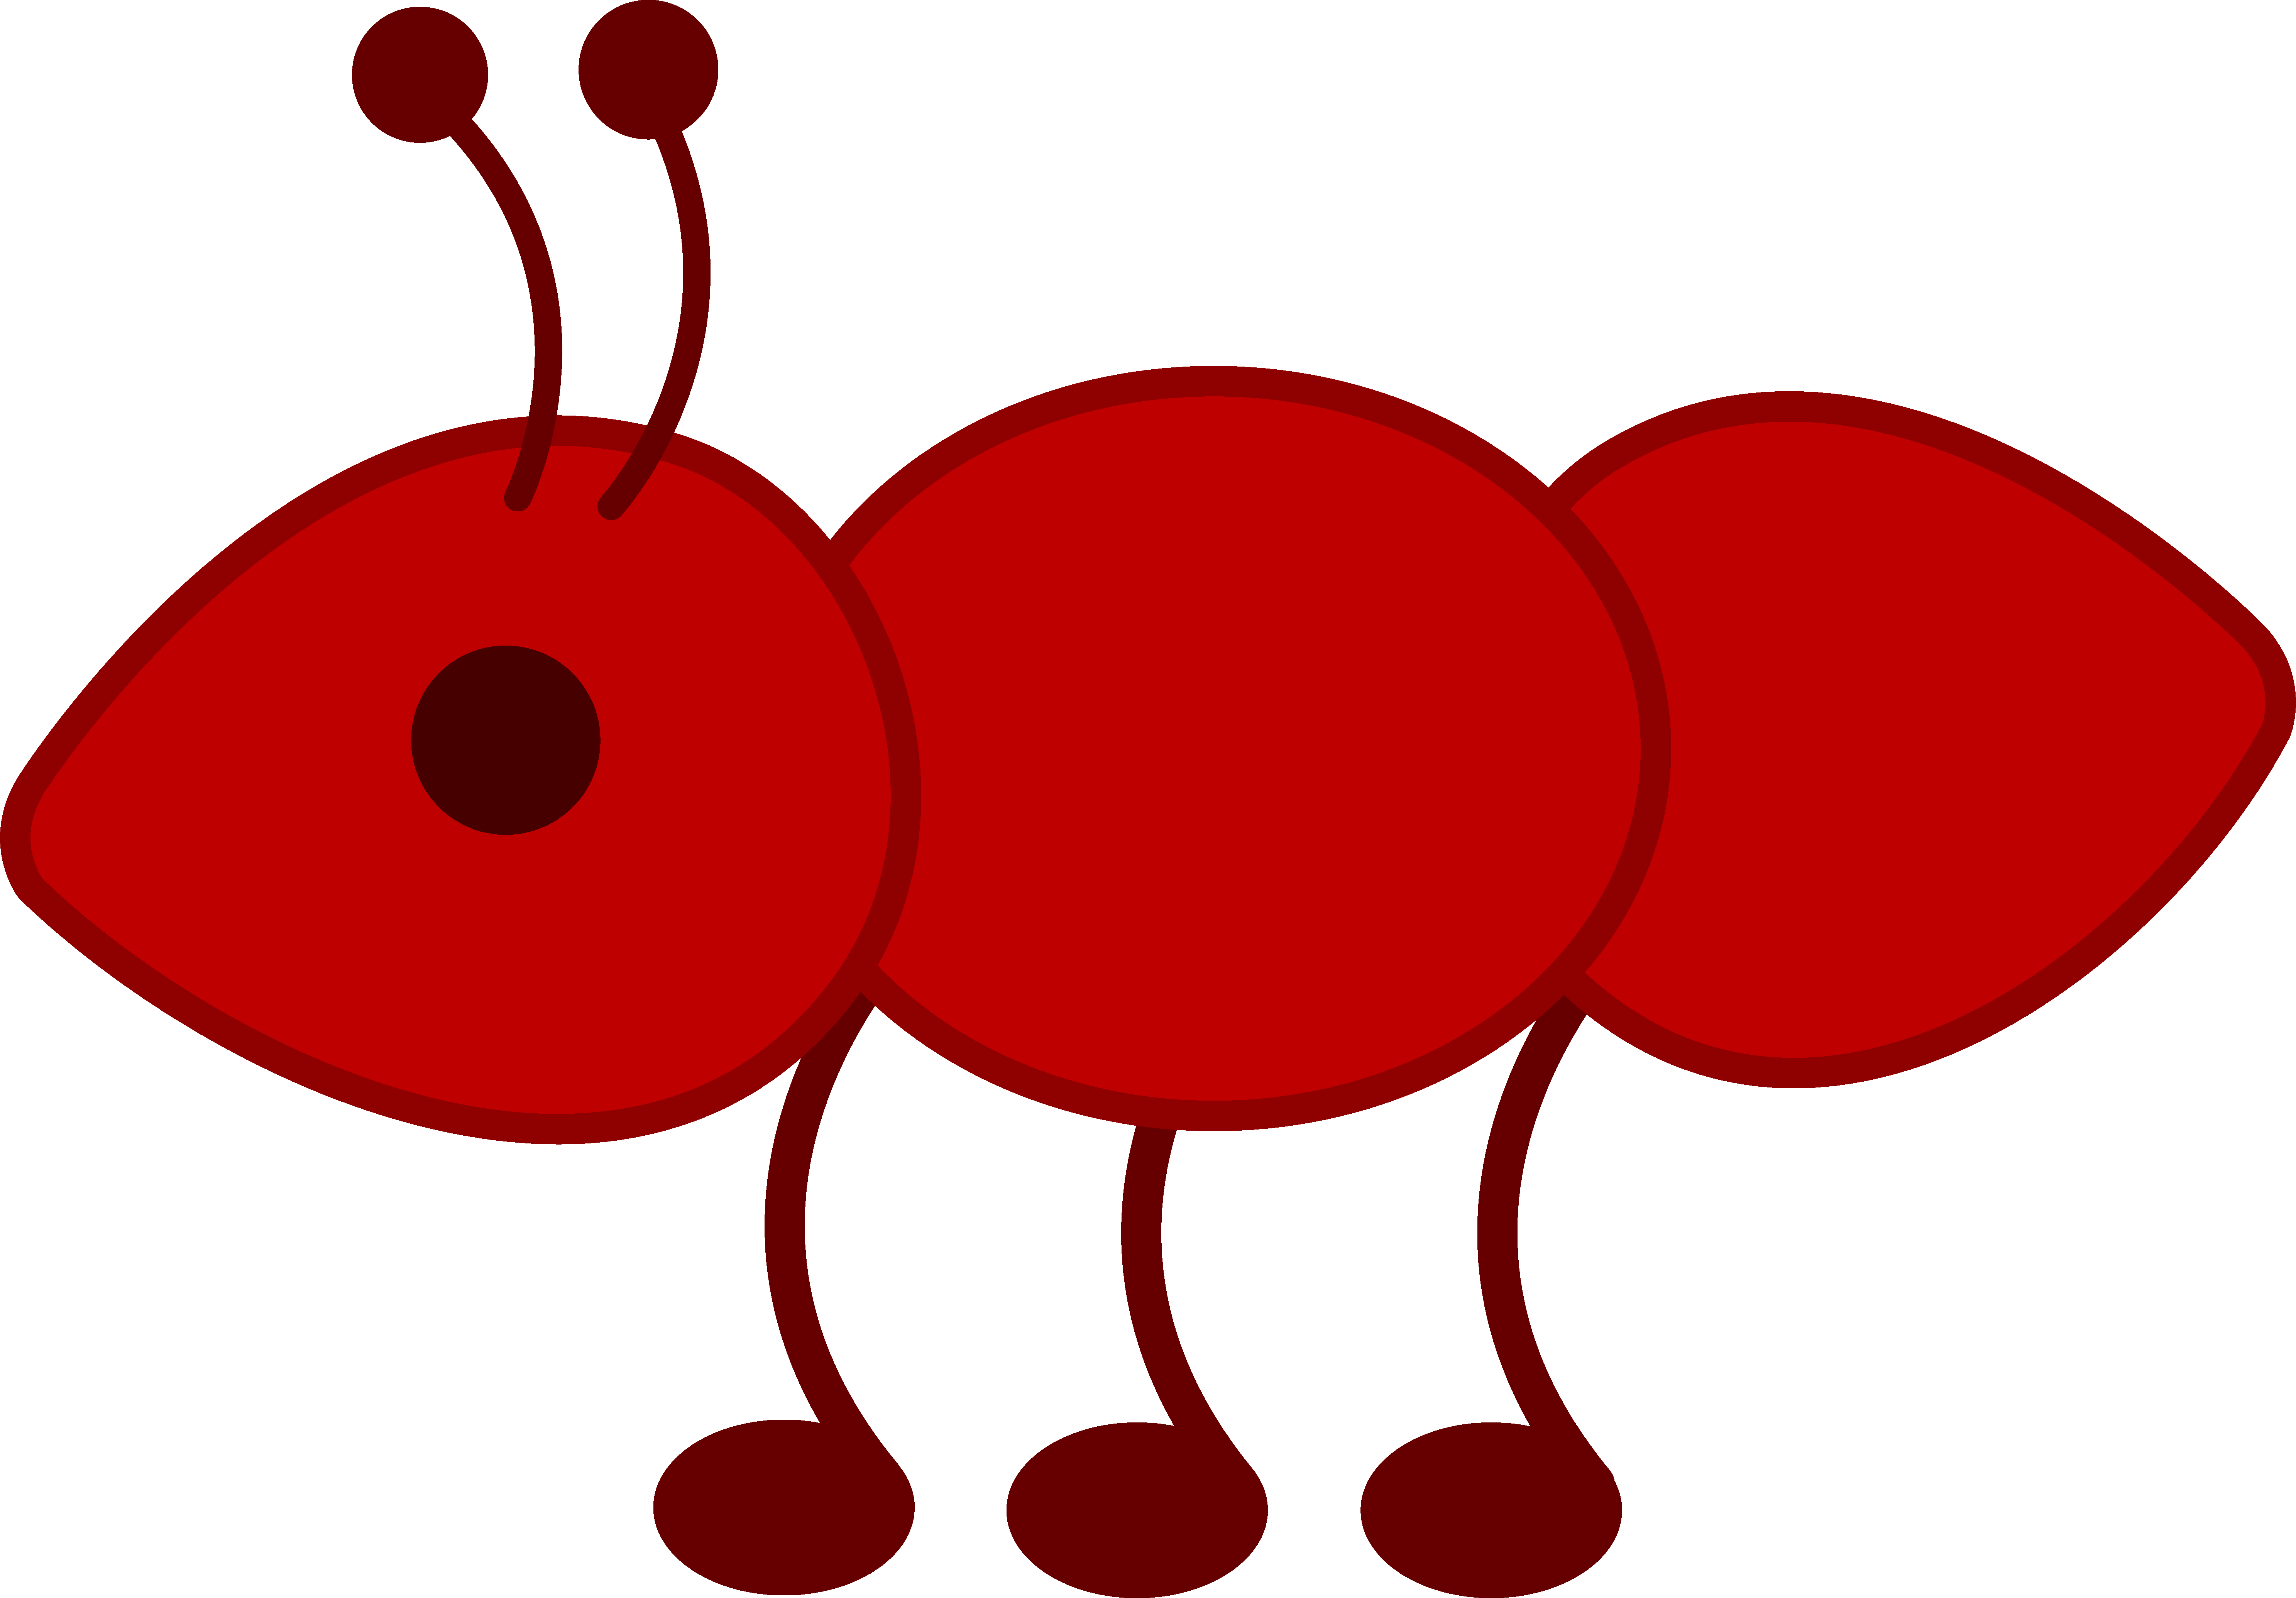 Ants clipart red object cute borders vectors animated black and png